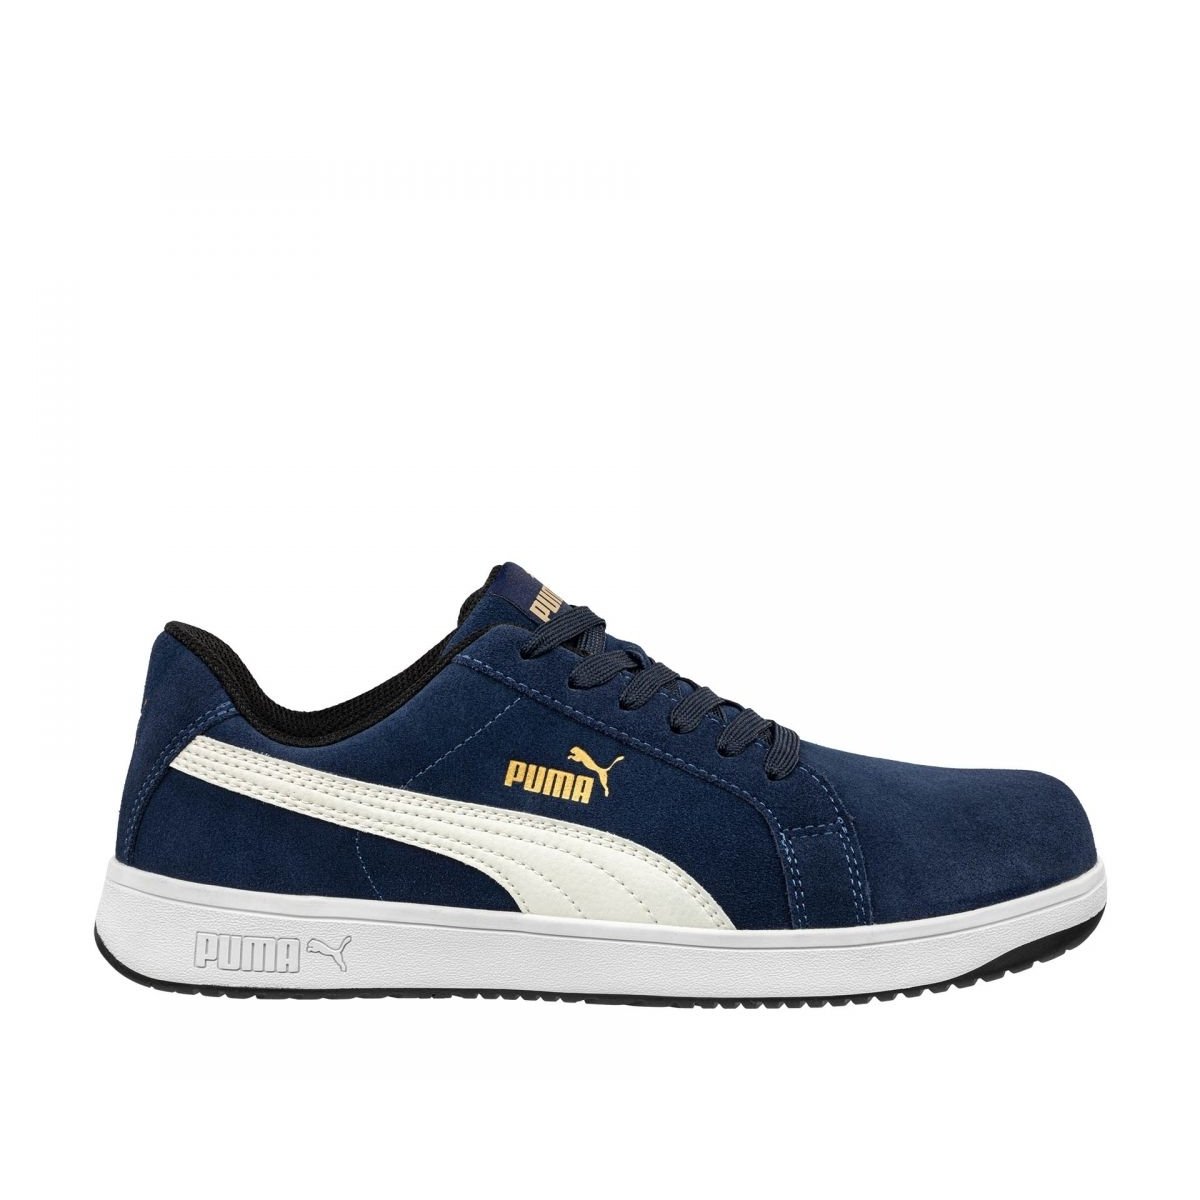 PUMA Safety Men's Iconic Low Composite Toe EH Work Shoes Navy Suede - 640025 ONE SIZE Navy - Navy, 8.5